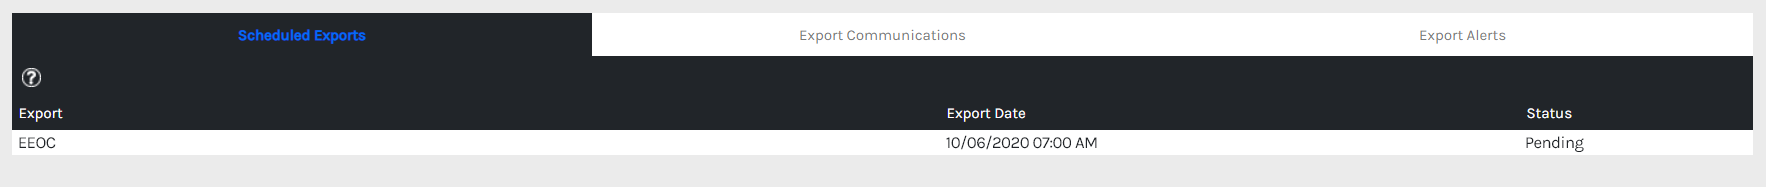 Scheduled_Exports_-_02.png